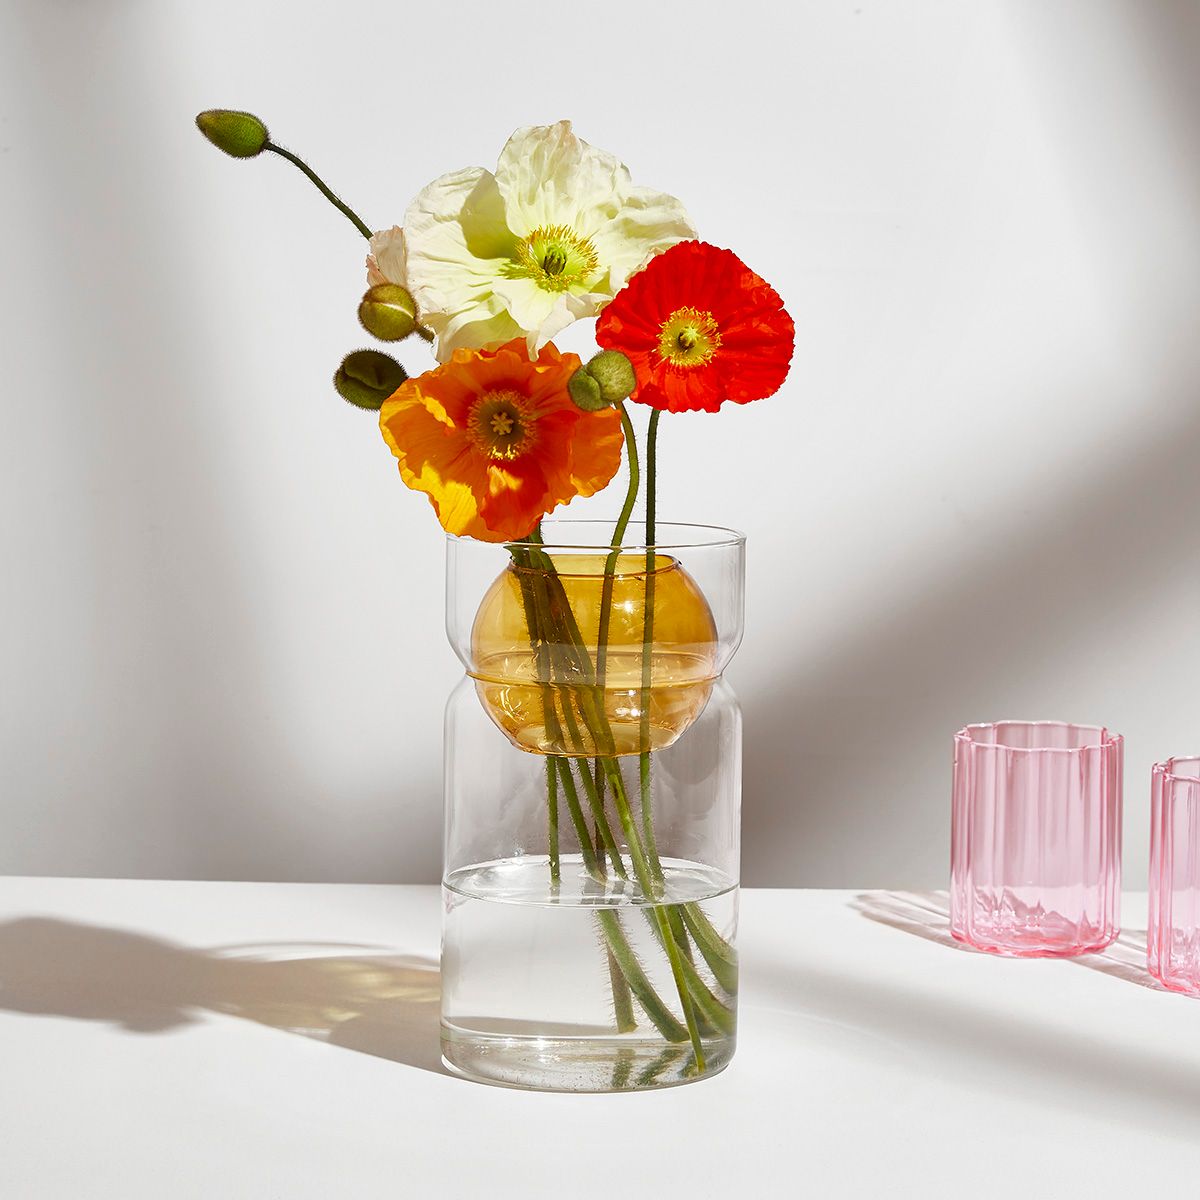 These playful cylindrical vases feature an internal sphere with two hand-cut holes ready to be filled with freshly picked flowers and foliage or to grace any space as a decorative sculptural piece.